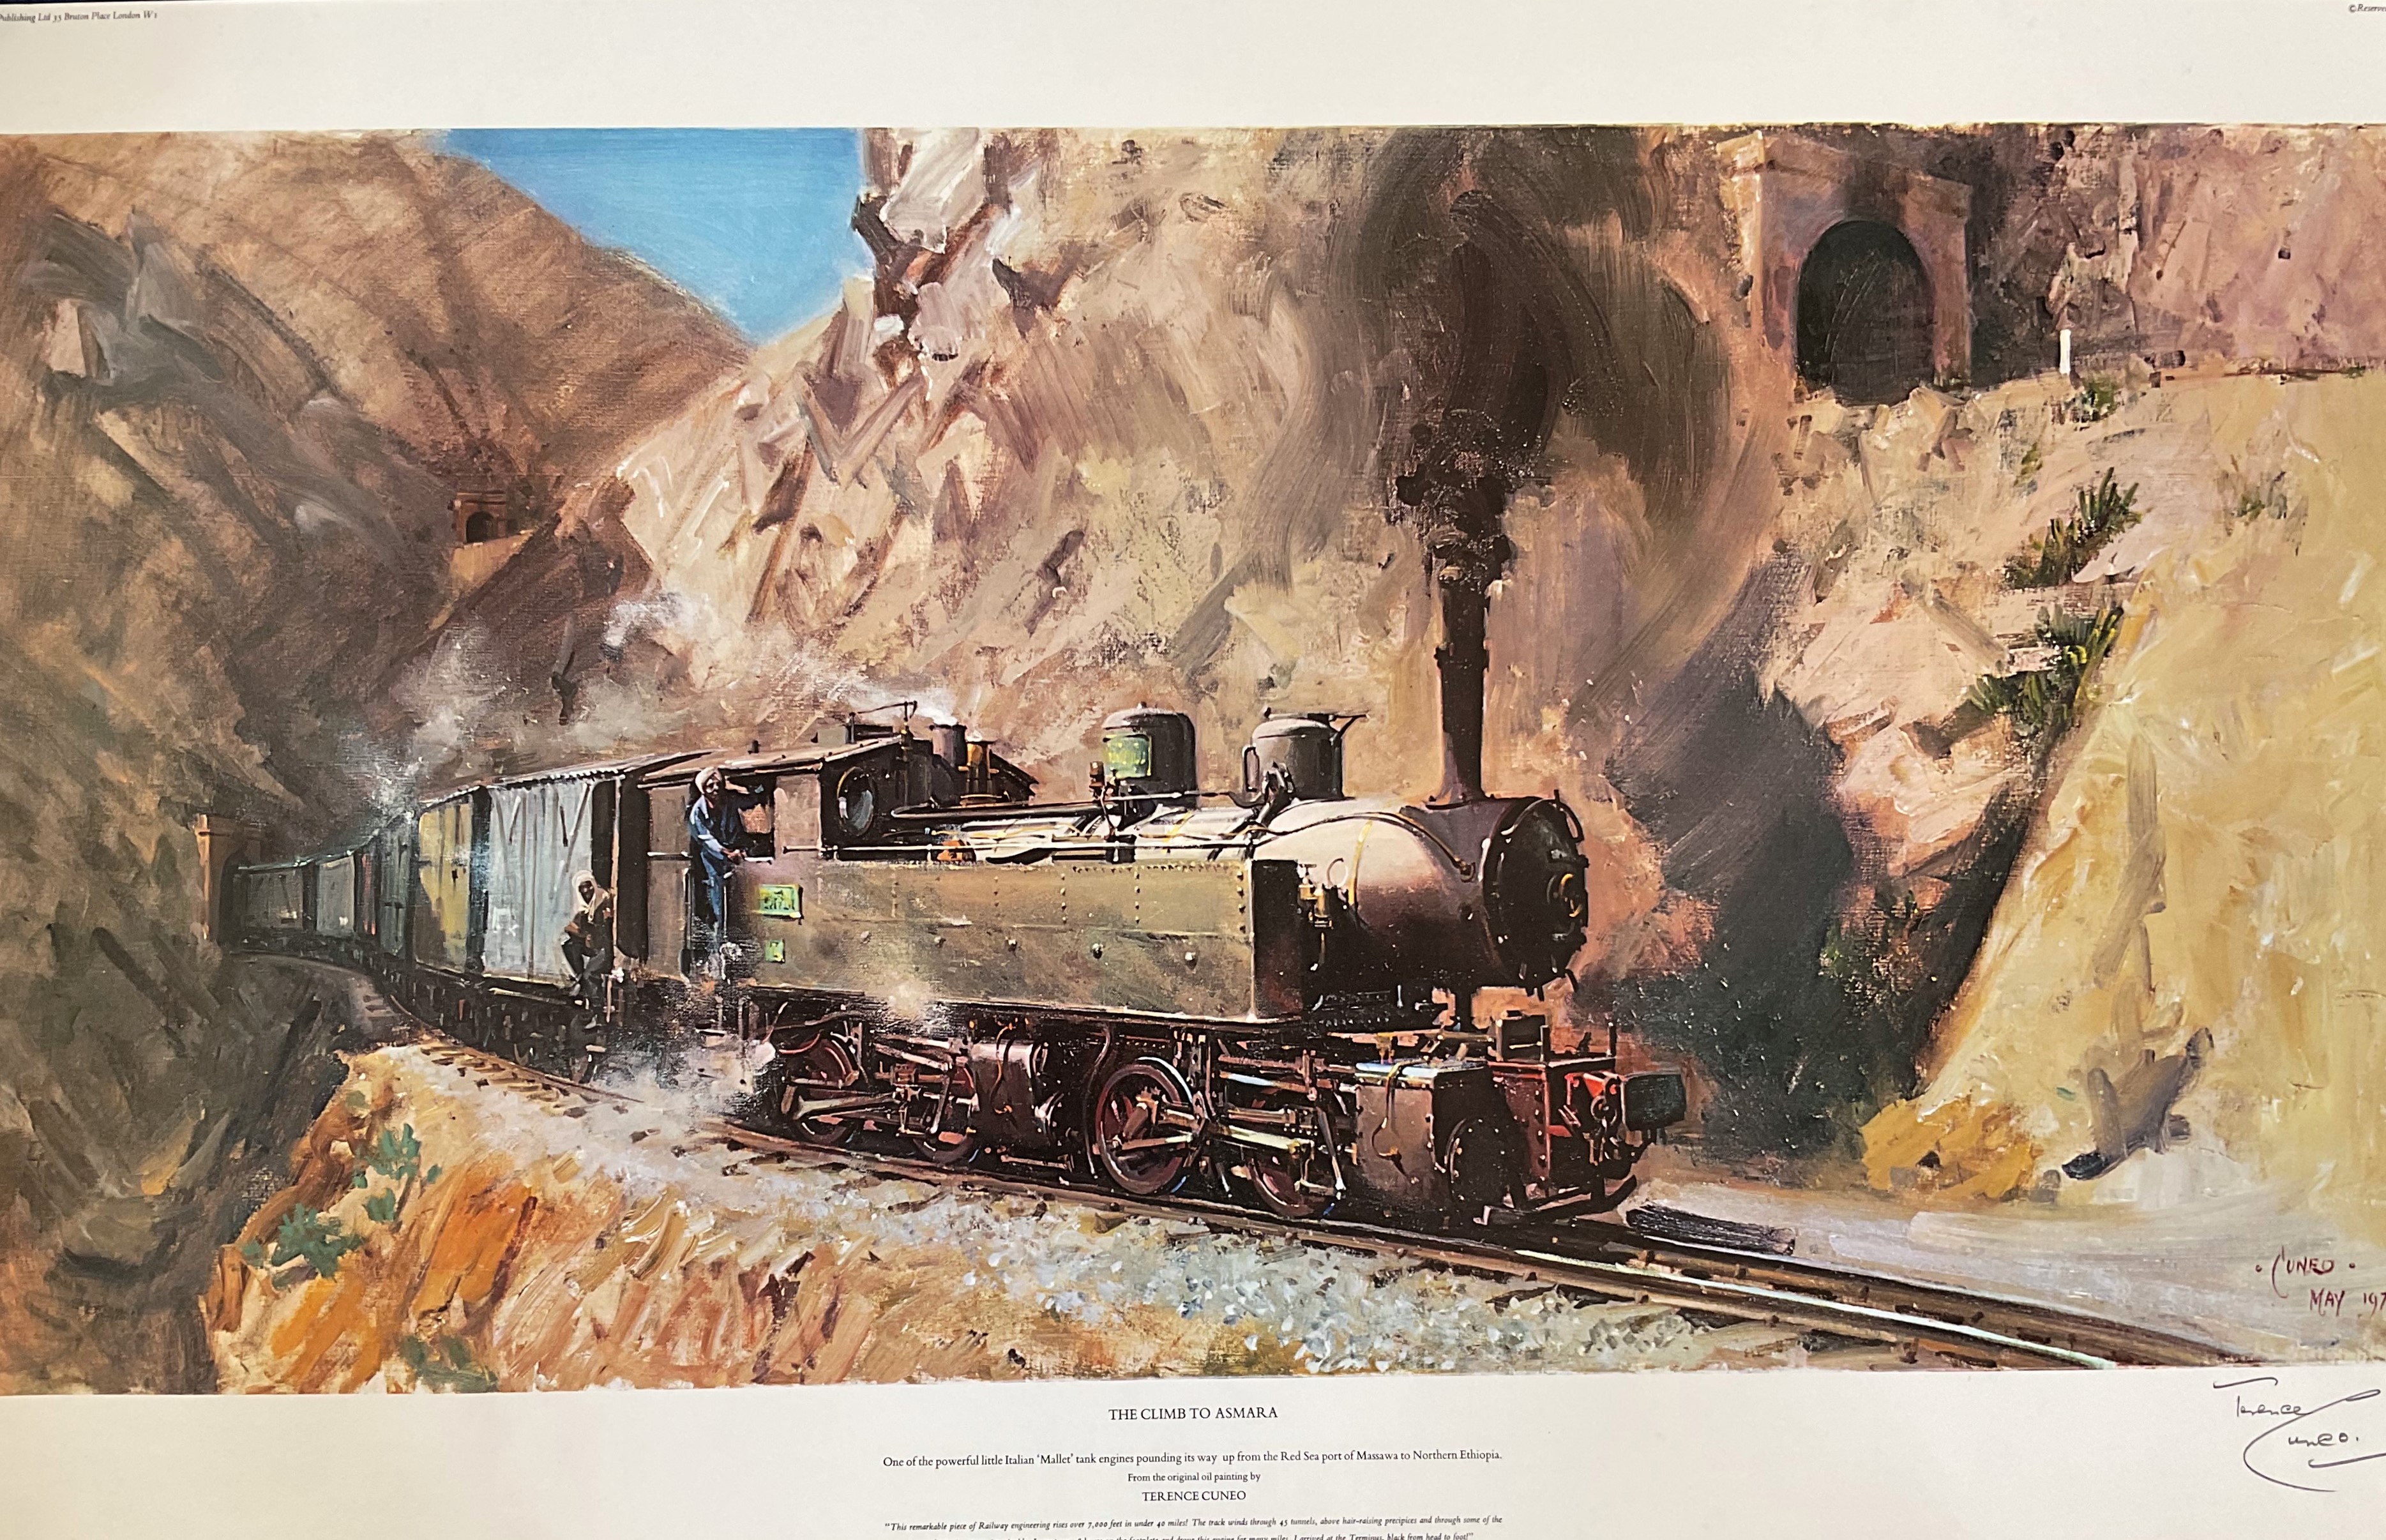 Terence Cuneo Handsigned 32x19 Colour Print Titled 'The Climb To Asmara'. Good Condition. All